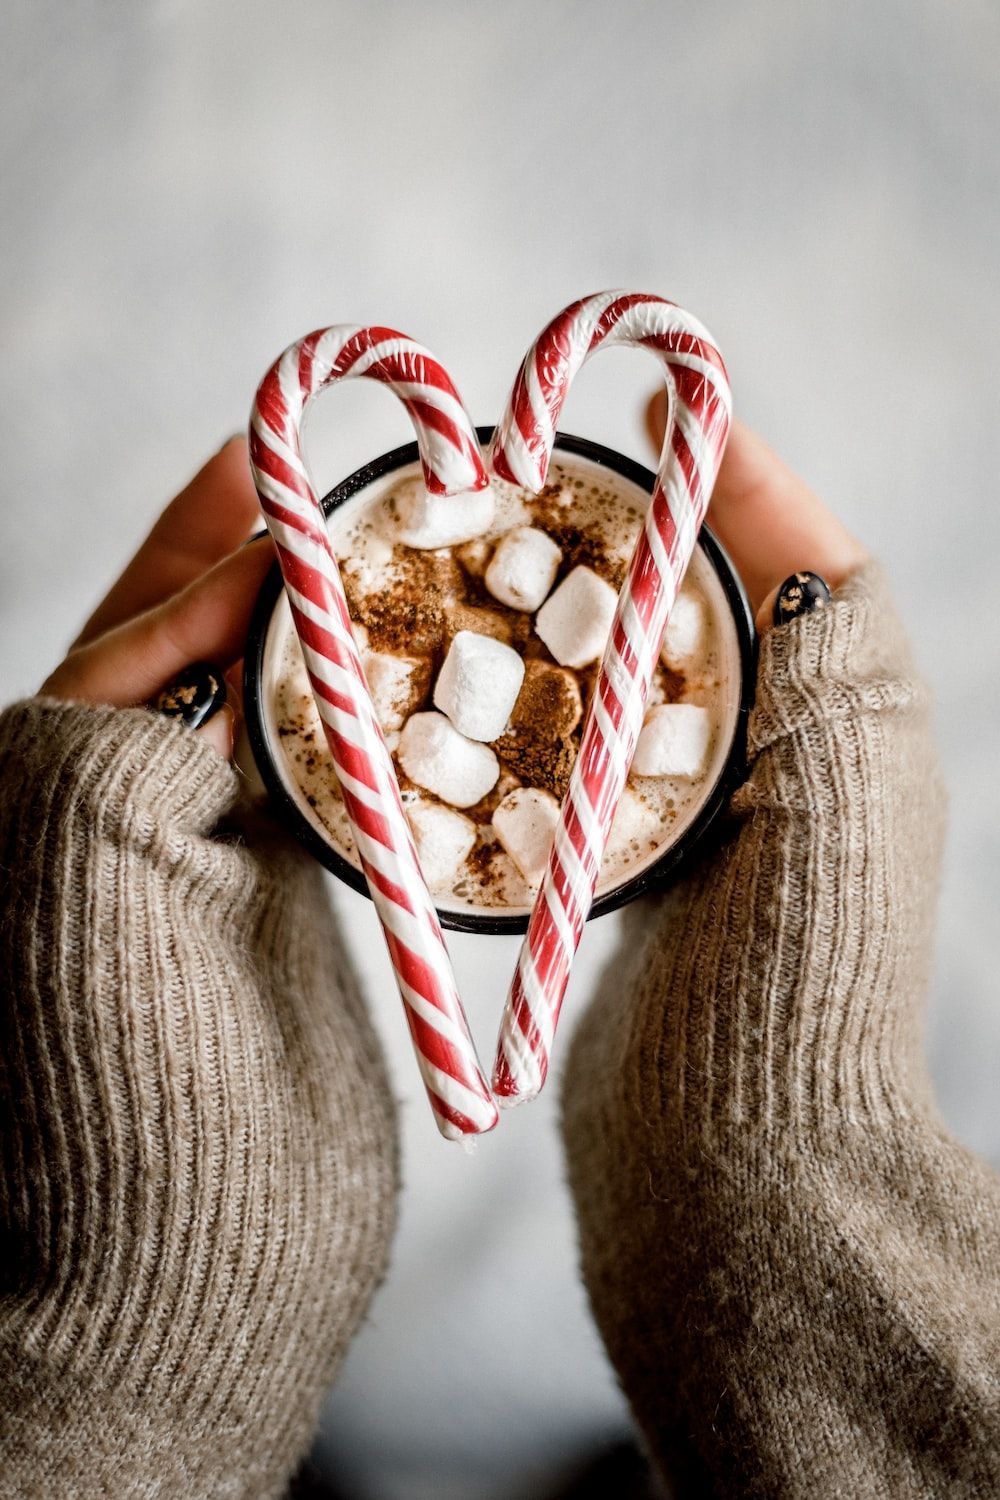 A woman's hands holding a mug of hot chocolate with candy canes in the shape of a heart. - Marshmallows